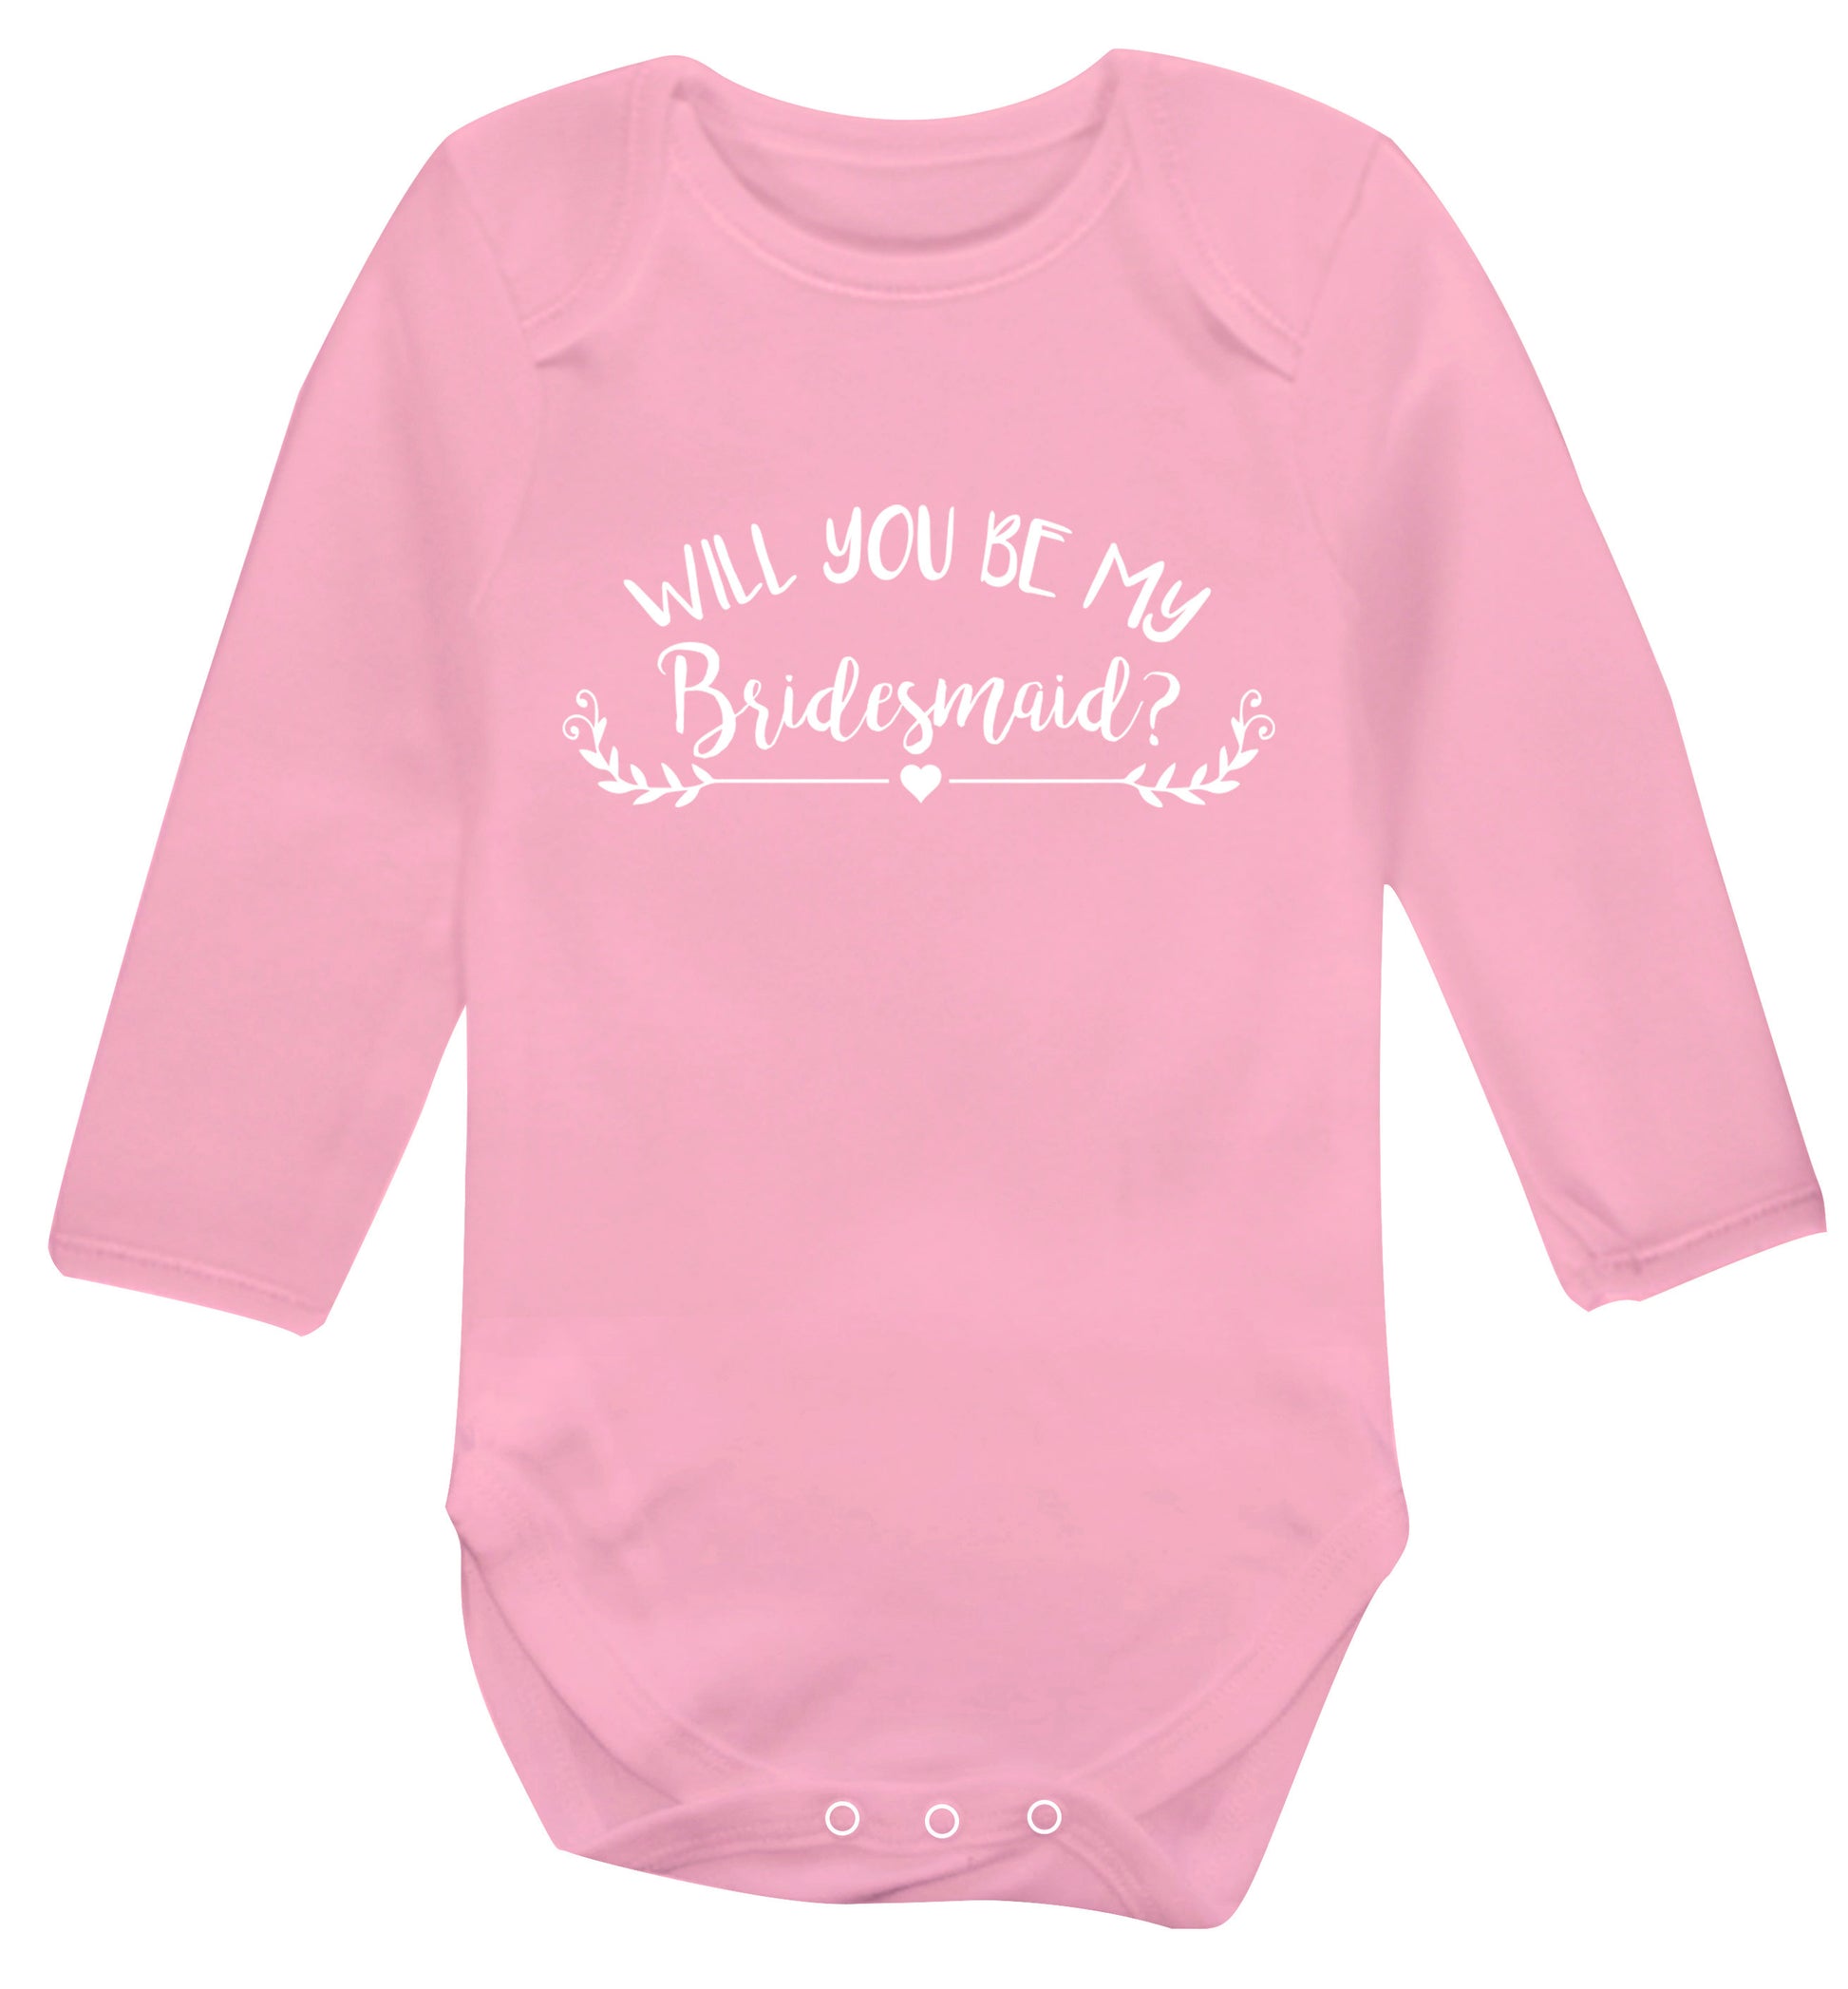 Will you be my bridesmaid? Baby Vest long sleeved pale pink 6-12 months